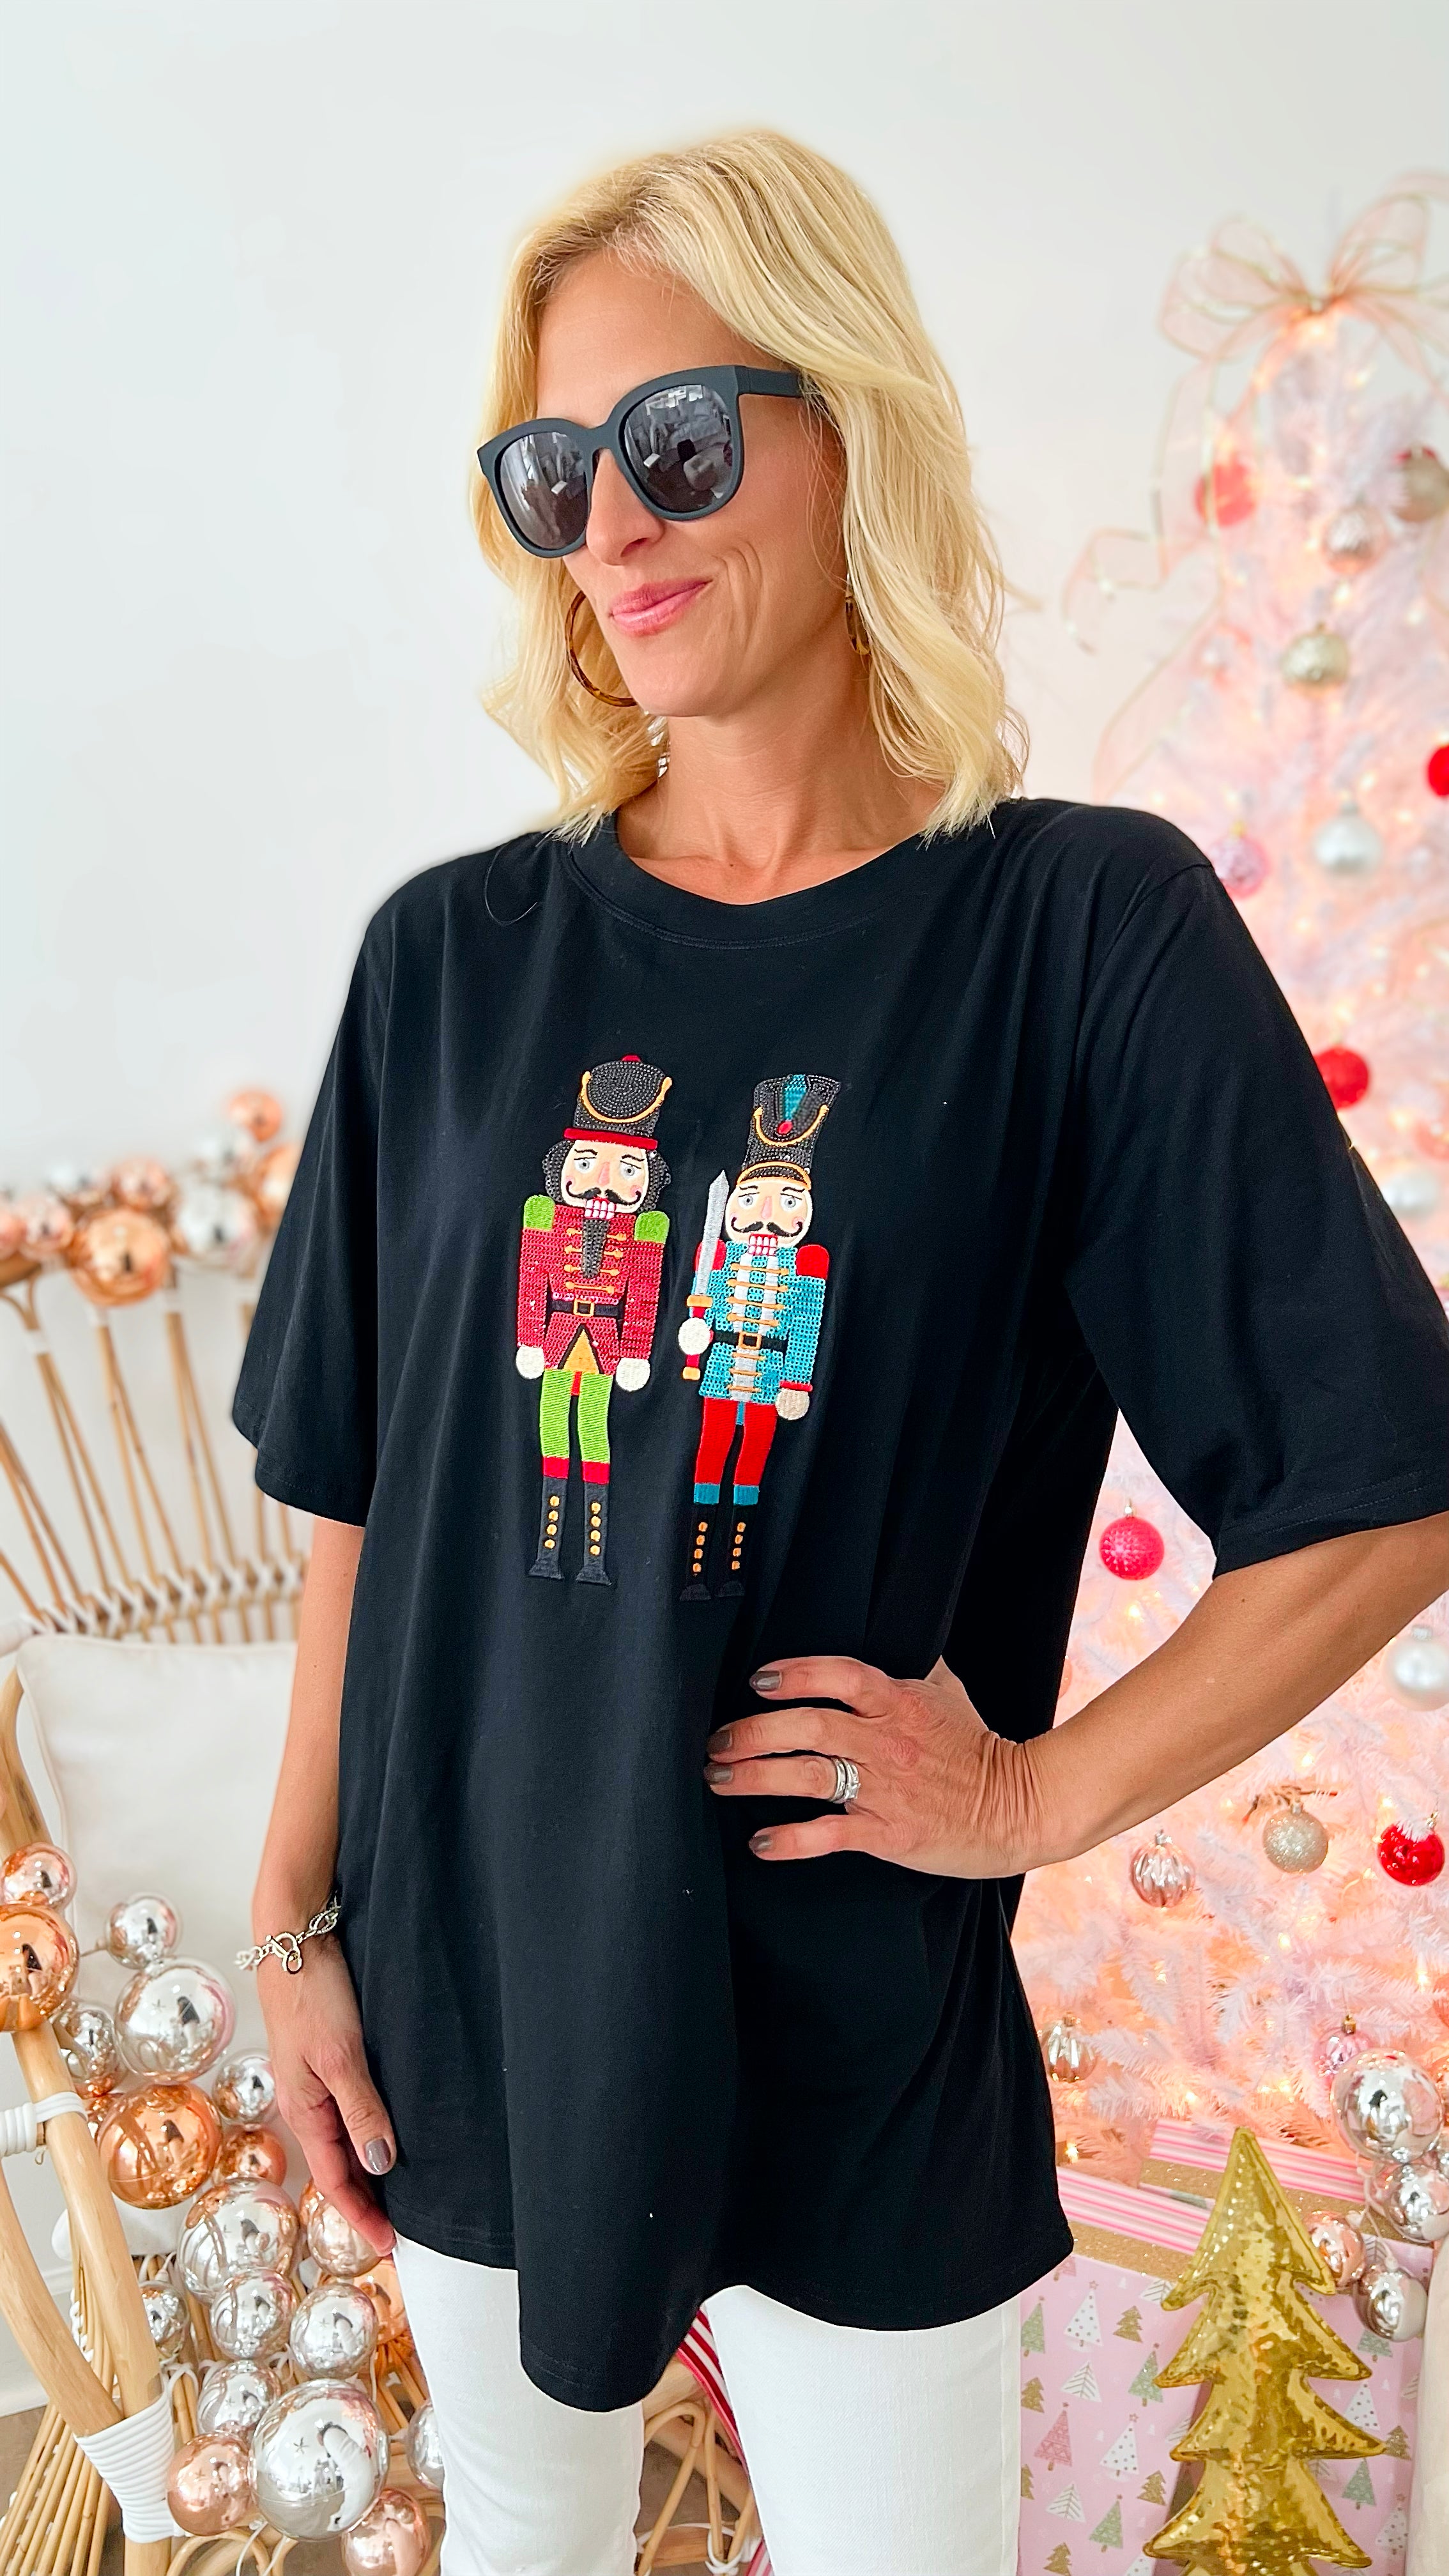 Sequin Nutcracker T-Shirt Dress/Tunic - Black-200 Dresses/Jumpsuits/Rompers-Why Dress-Coastal Bloom Boutique, find the trendiest versions of the popular styles and looks Located in Indialantic, FL